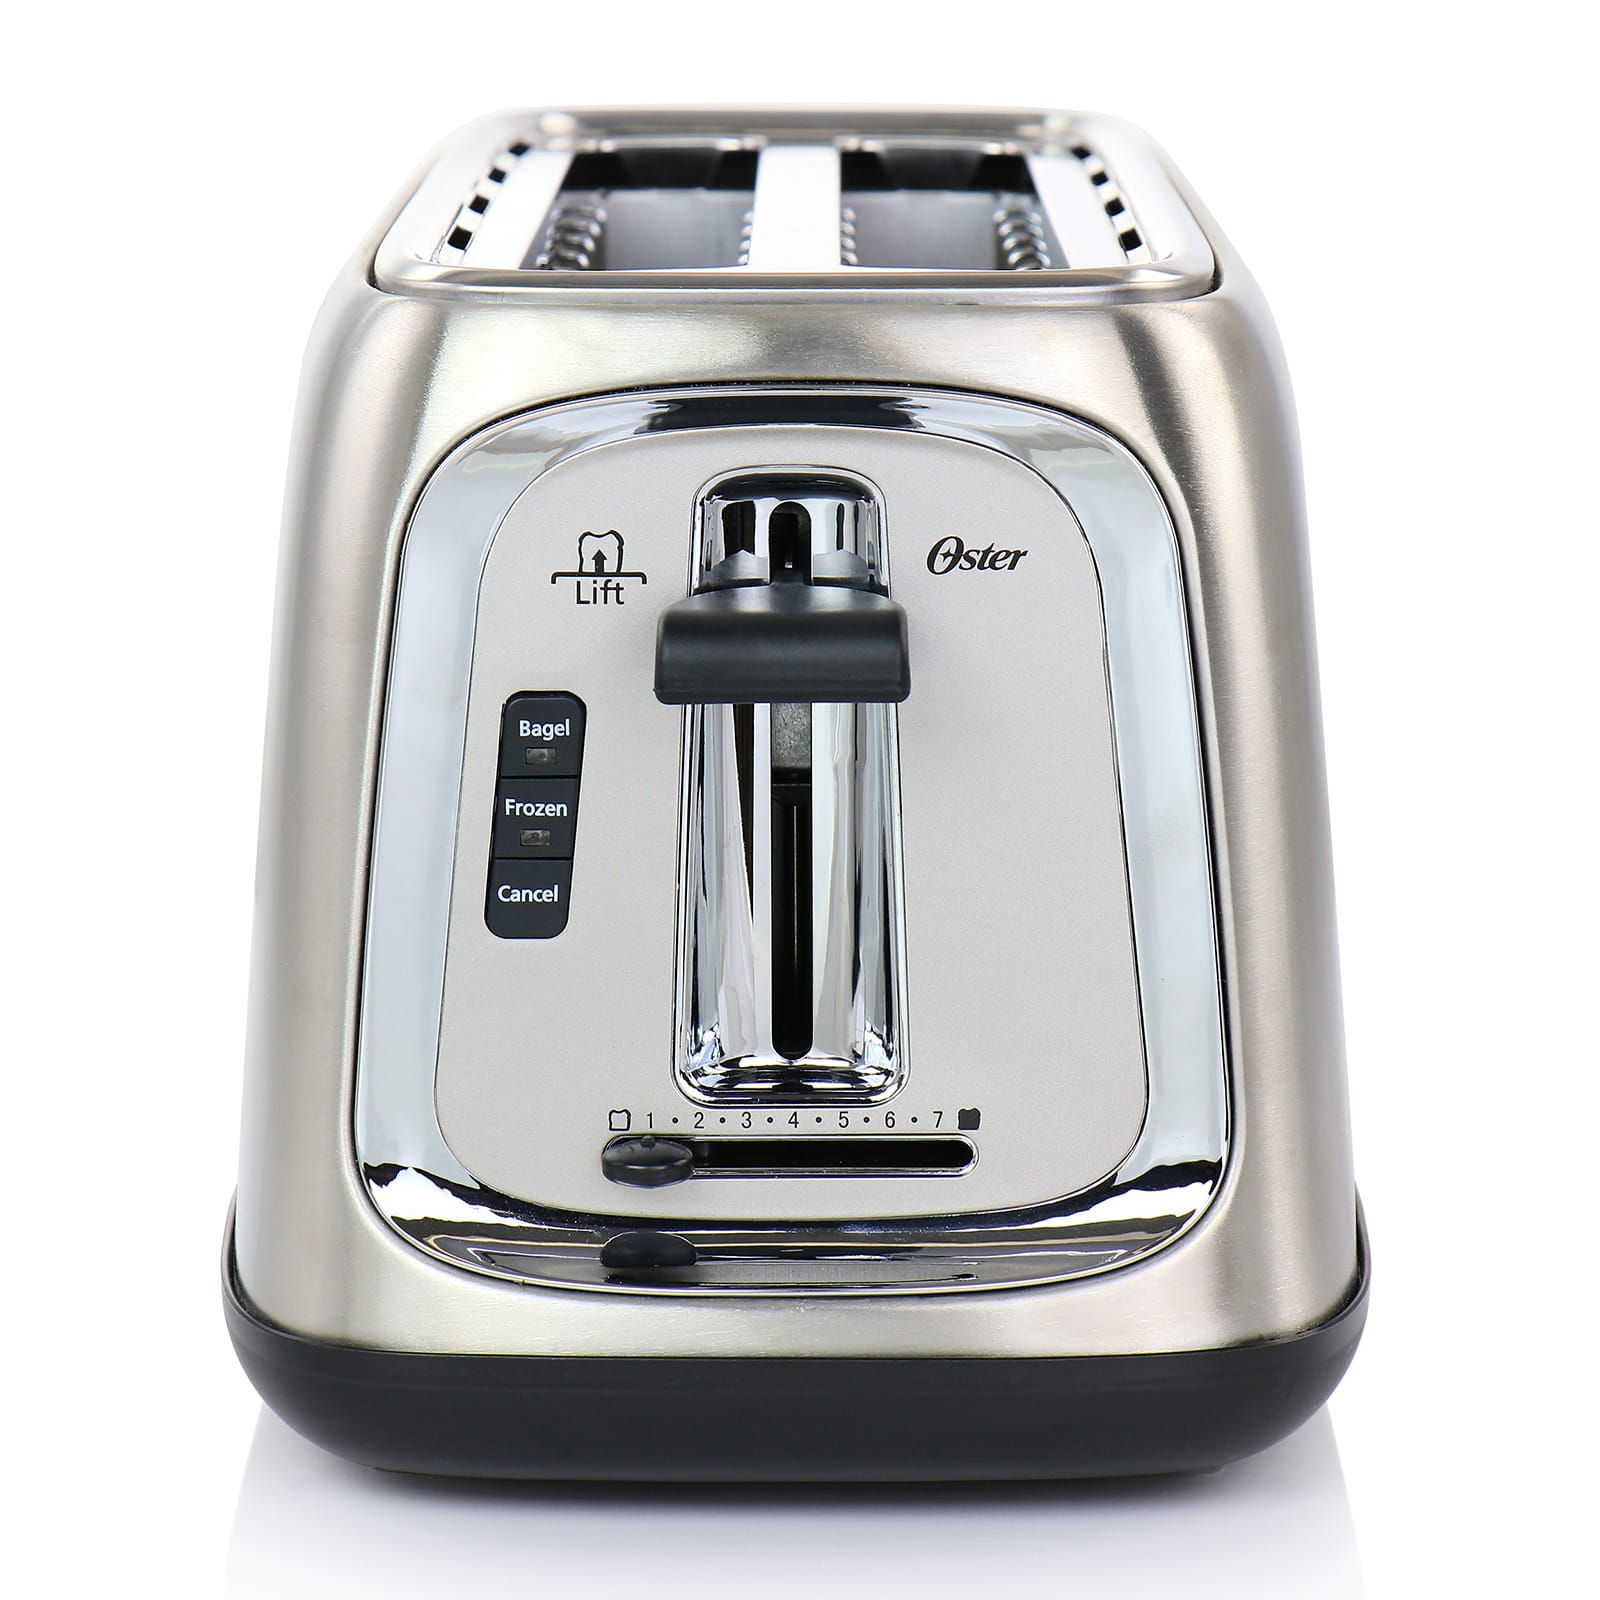 Oster 4 Slice Stainless Steel Toaster